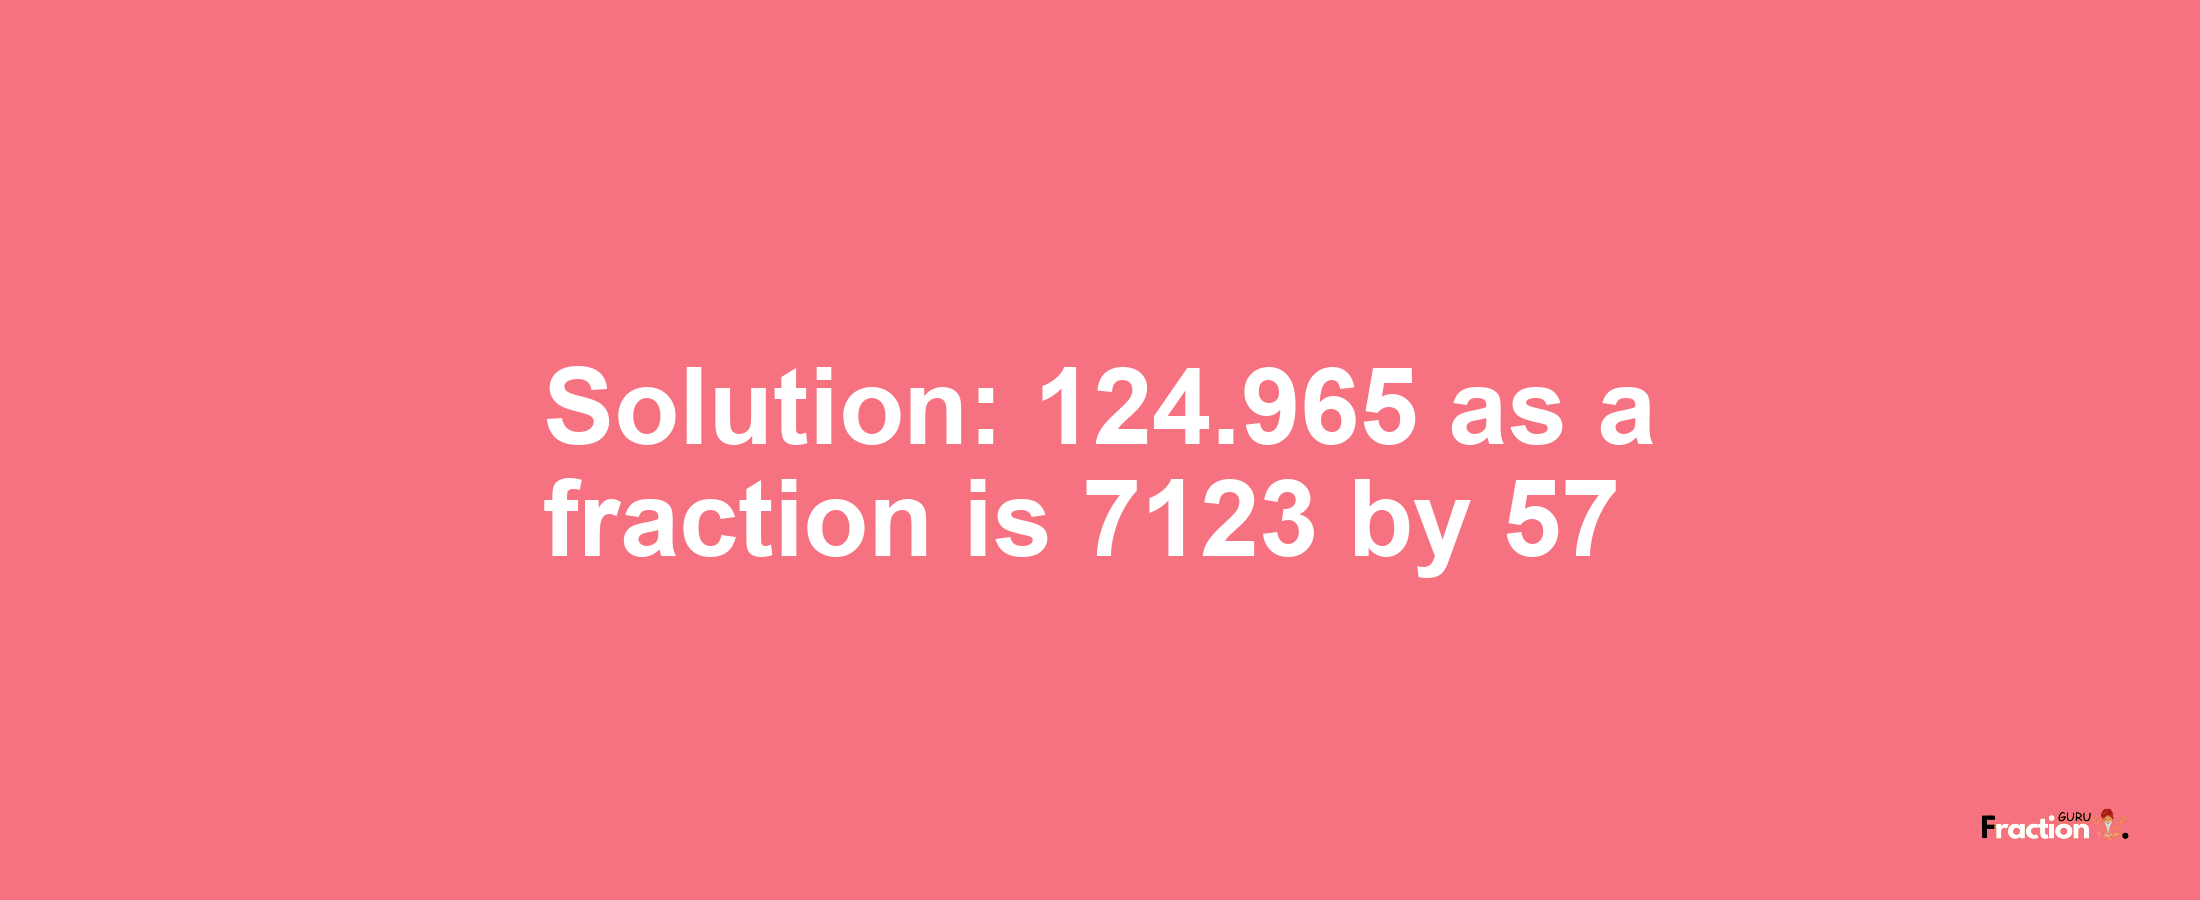 Solution:124.965 as a fraction is 7123/57